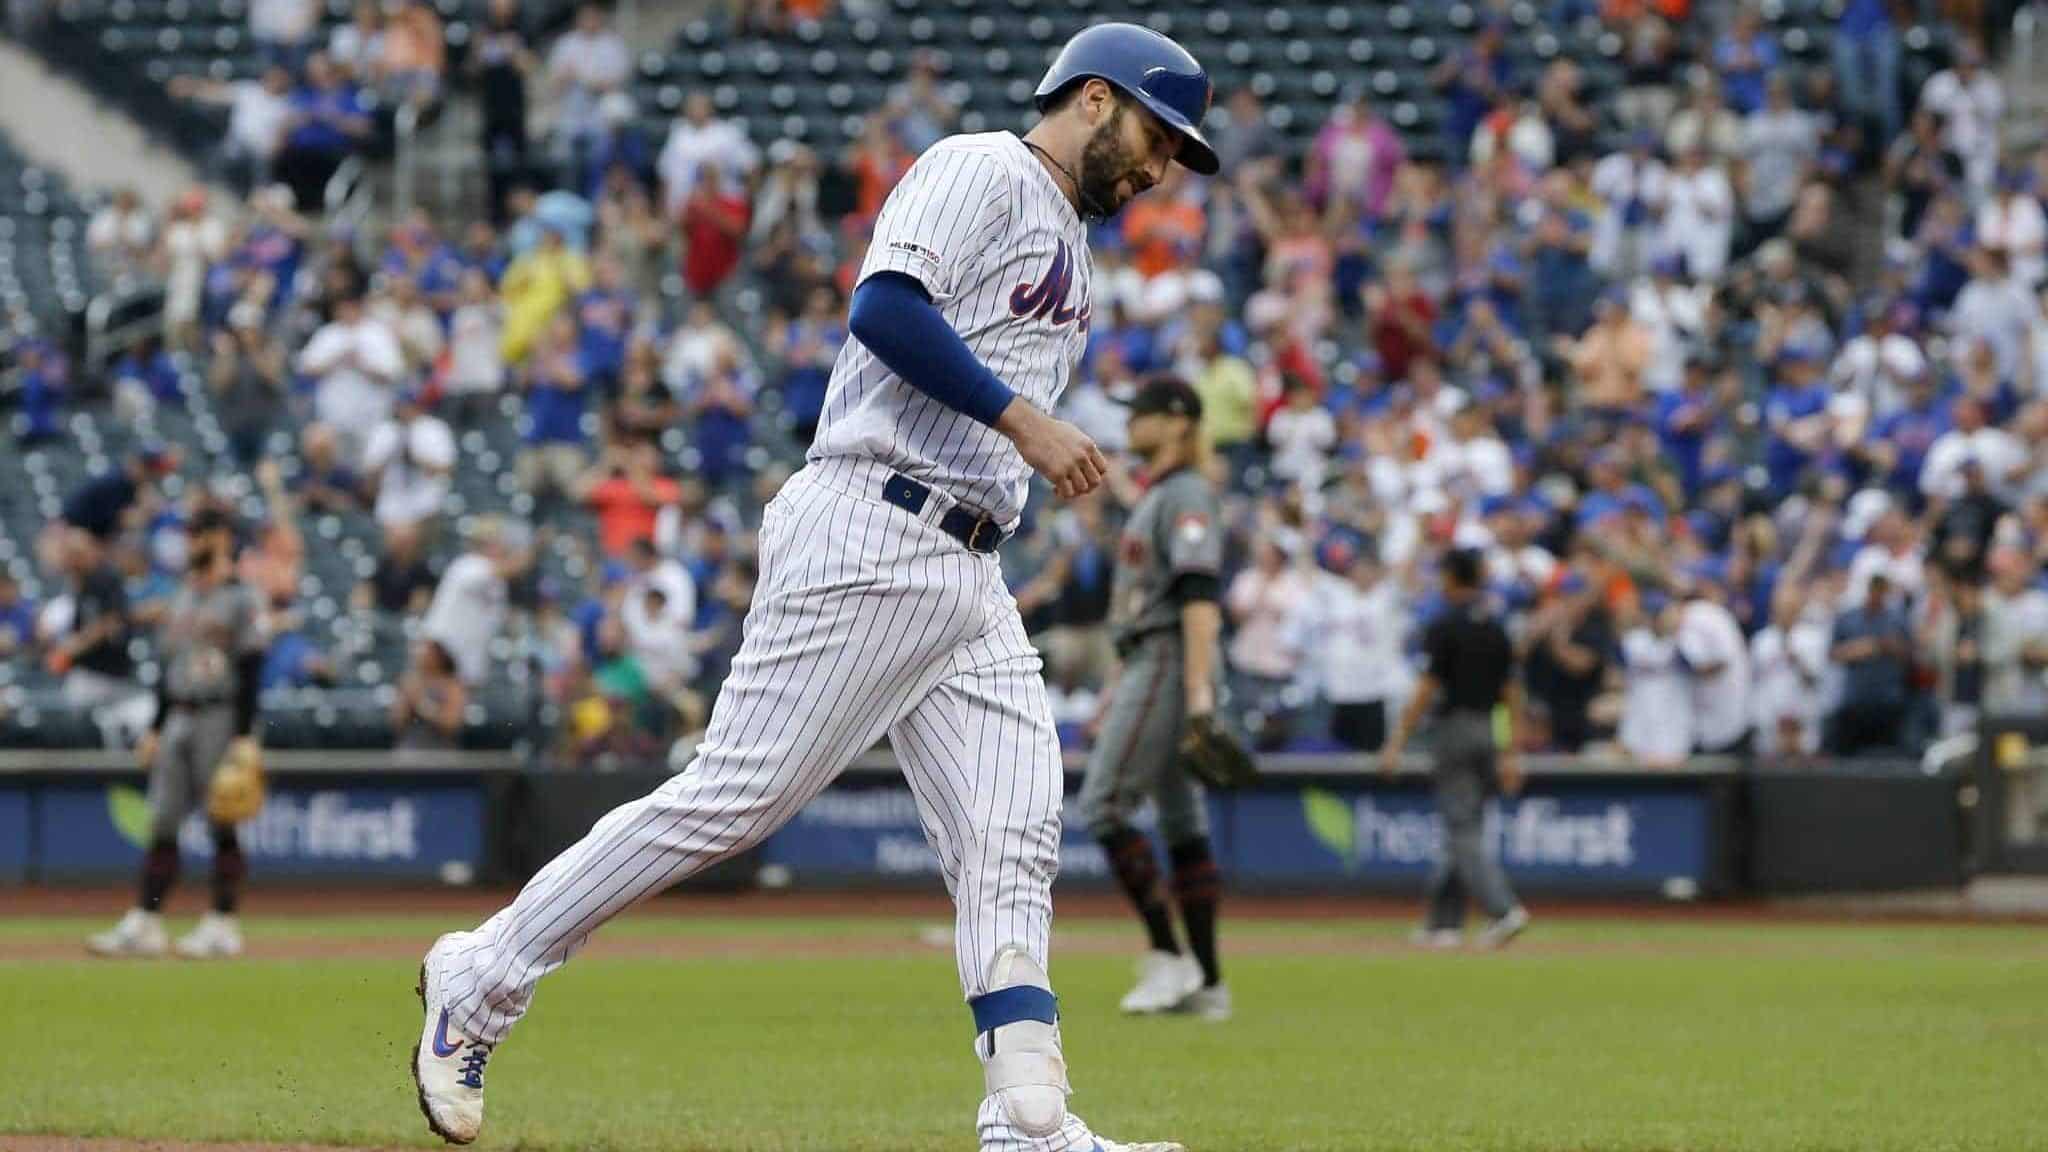 NEW YORK, NEW YORK - SEPTEMBER 12: Tomas Nido #3 of the New York Mets runs the bases after his fifth inning home run against Jimmie Sherfy #54 of the Arizona Diamondbacks at Citi Field on September 12, 2019 in New York City.